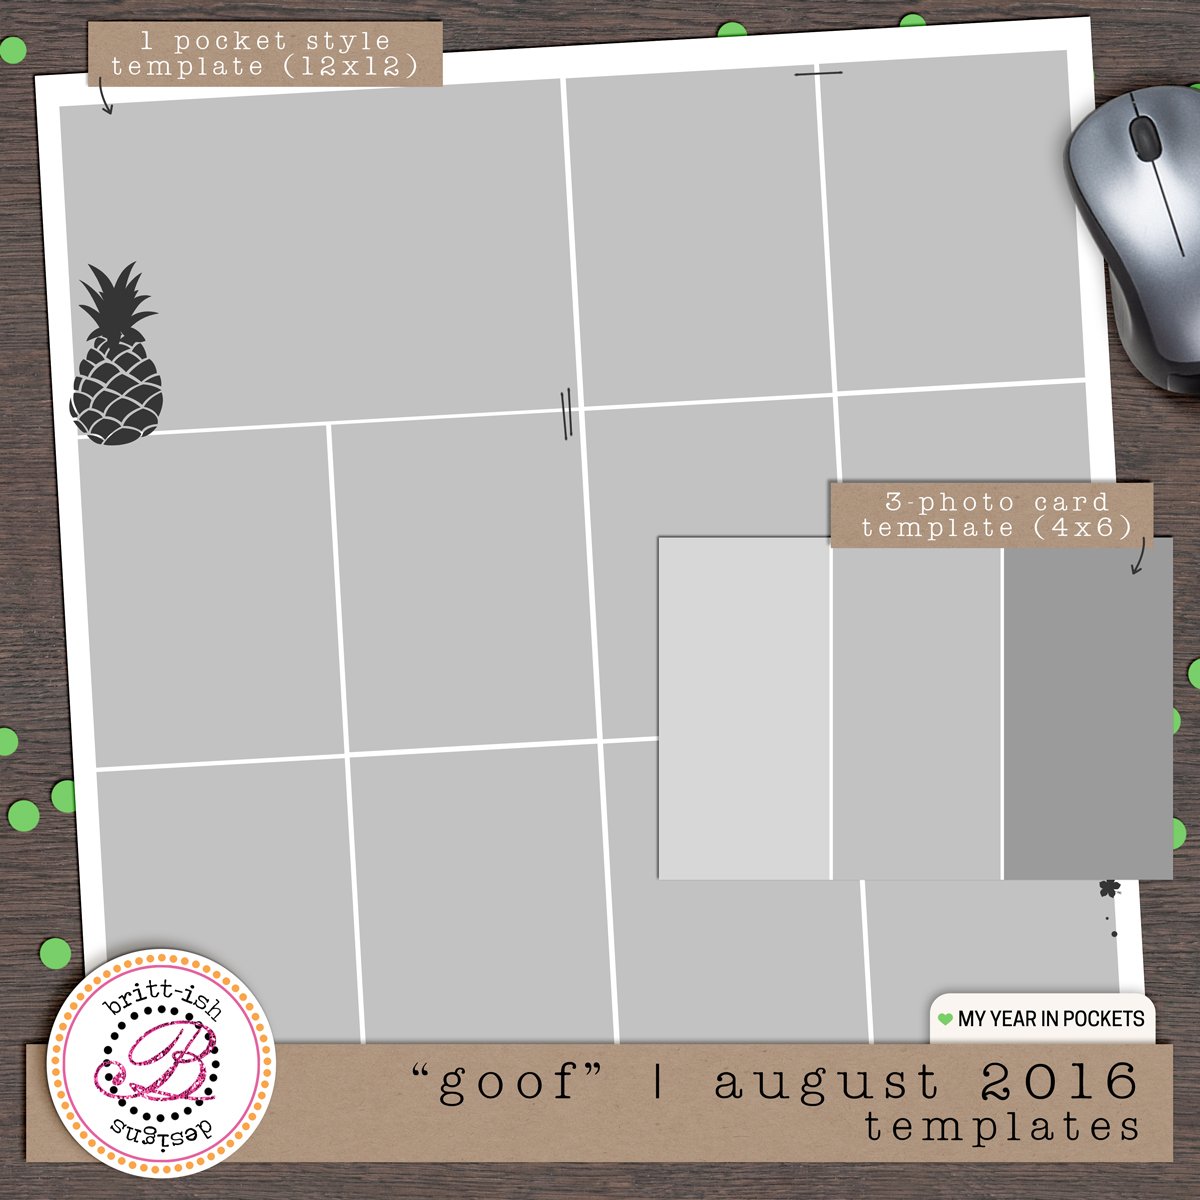 My Year In Pockets: "Goof" | August 2016 (Templates)